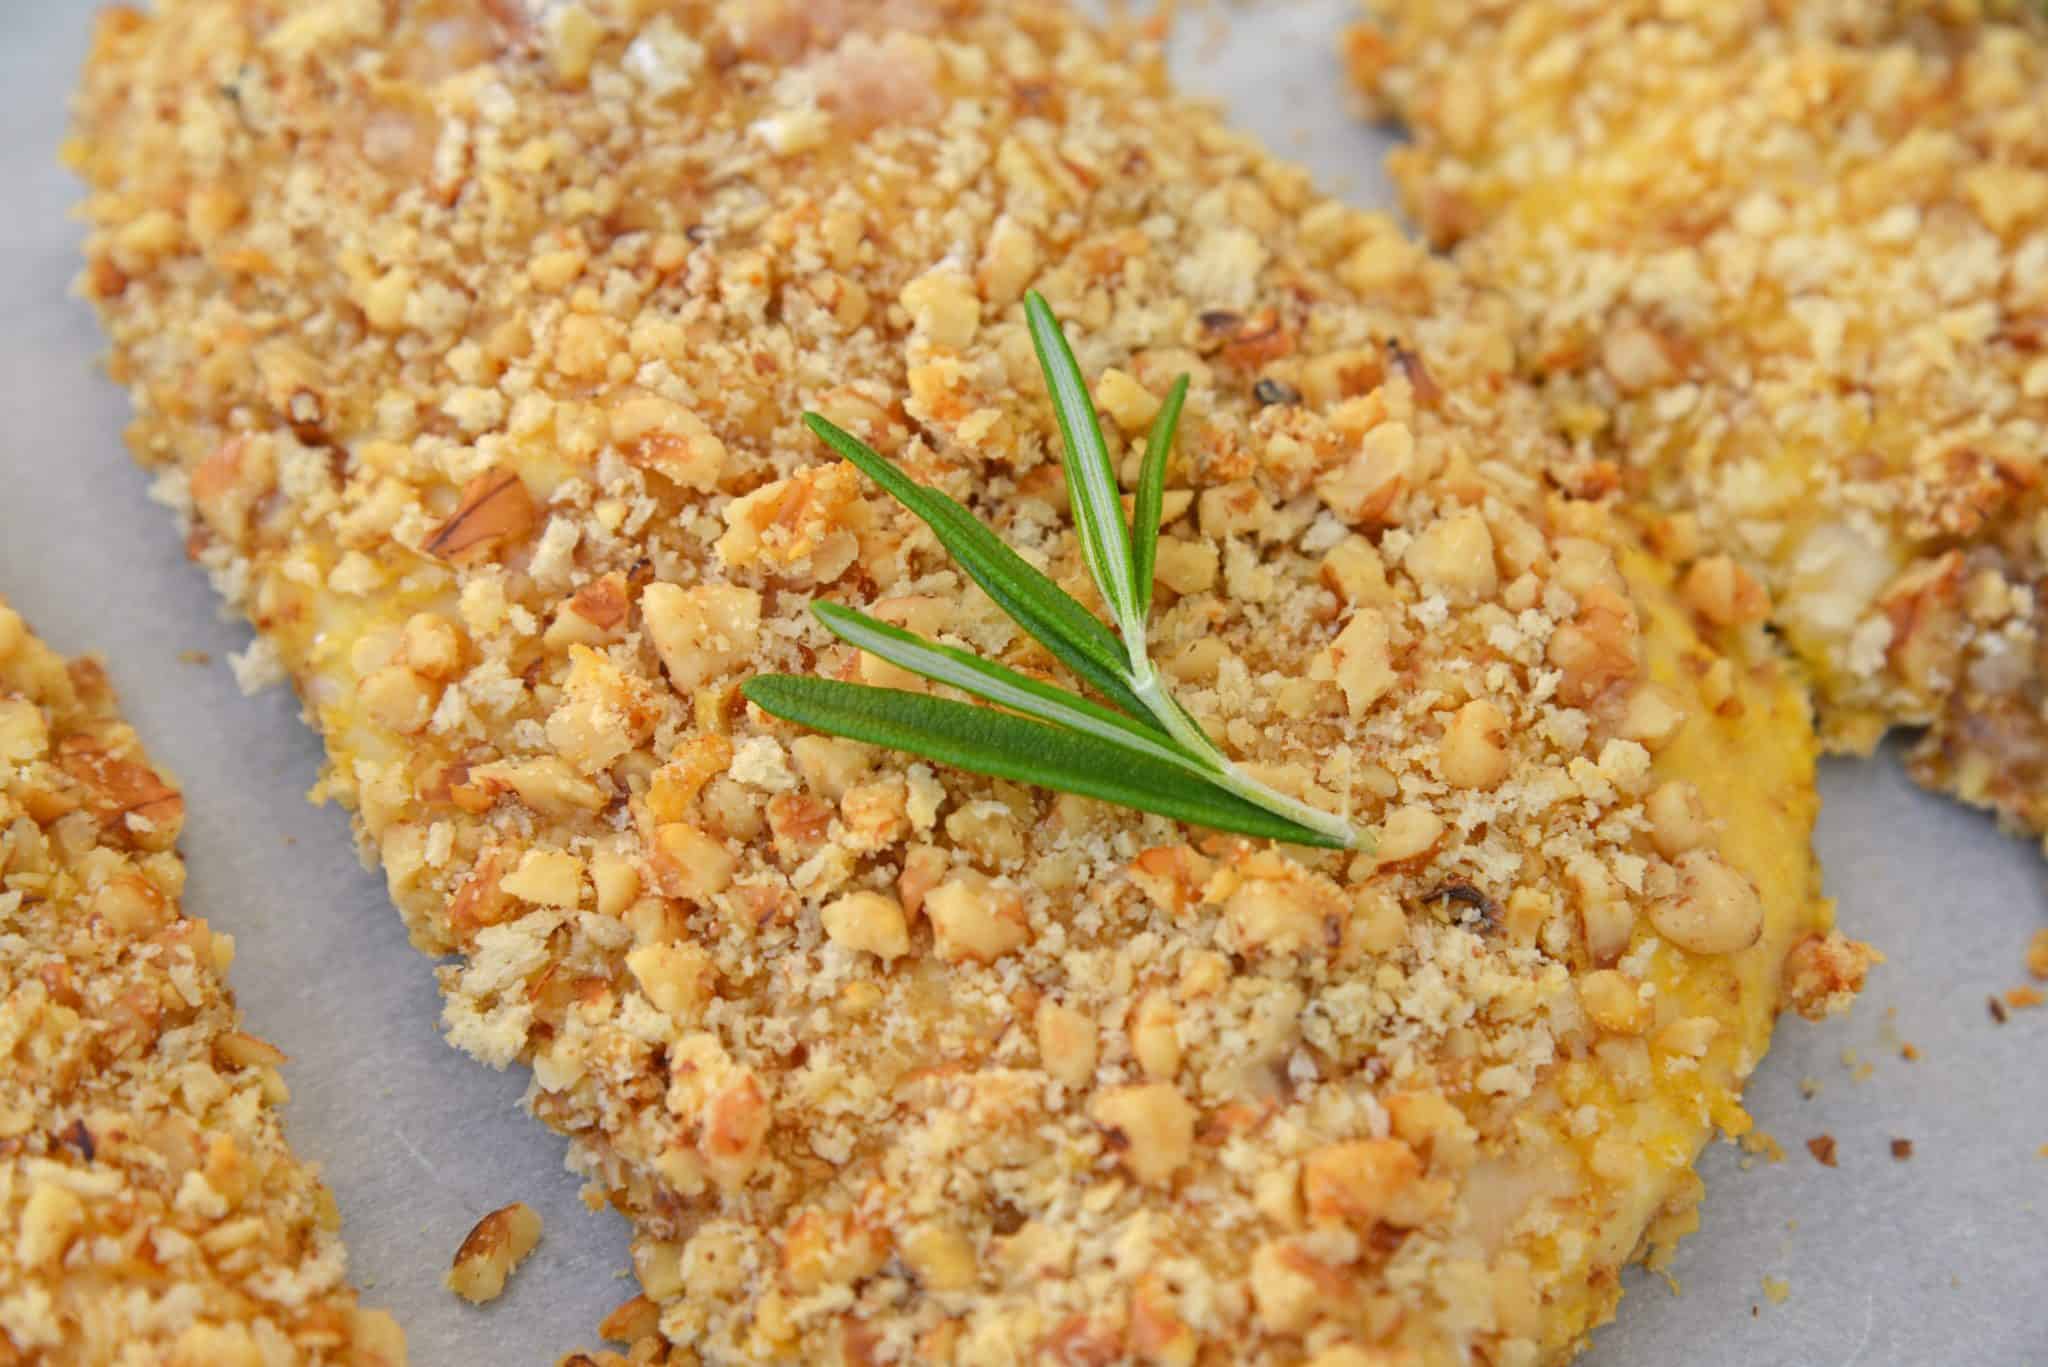 Walnut Crusted Chicken is a deliciously healthy, crunchy chicken with a cool dipping sauce! Made with chopped walnuts, panko bread crumbs, and fresh rosemary! #walnutcrustedchicken #rosemarychicken www.savoryexperiments.com